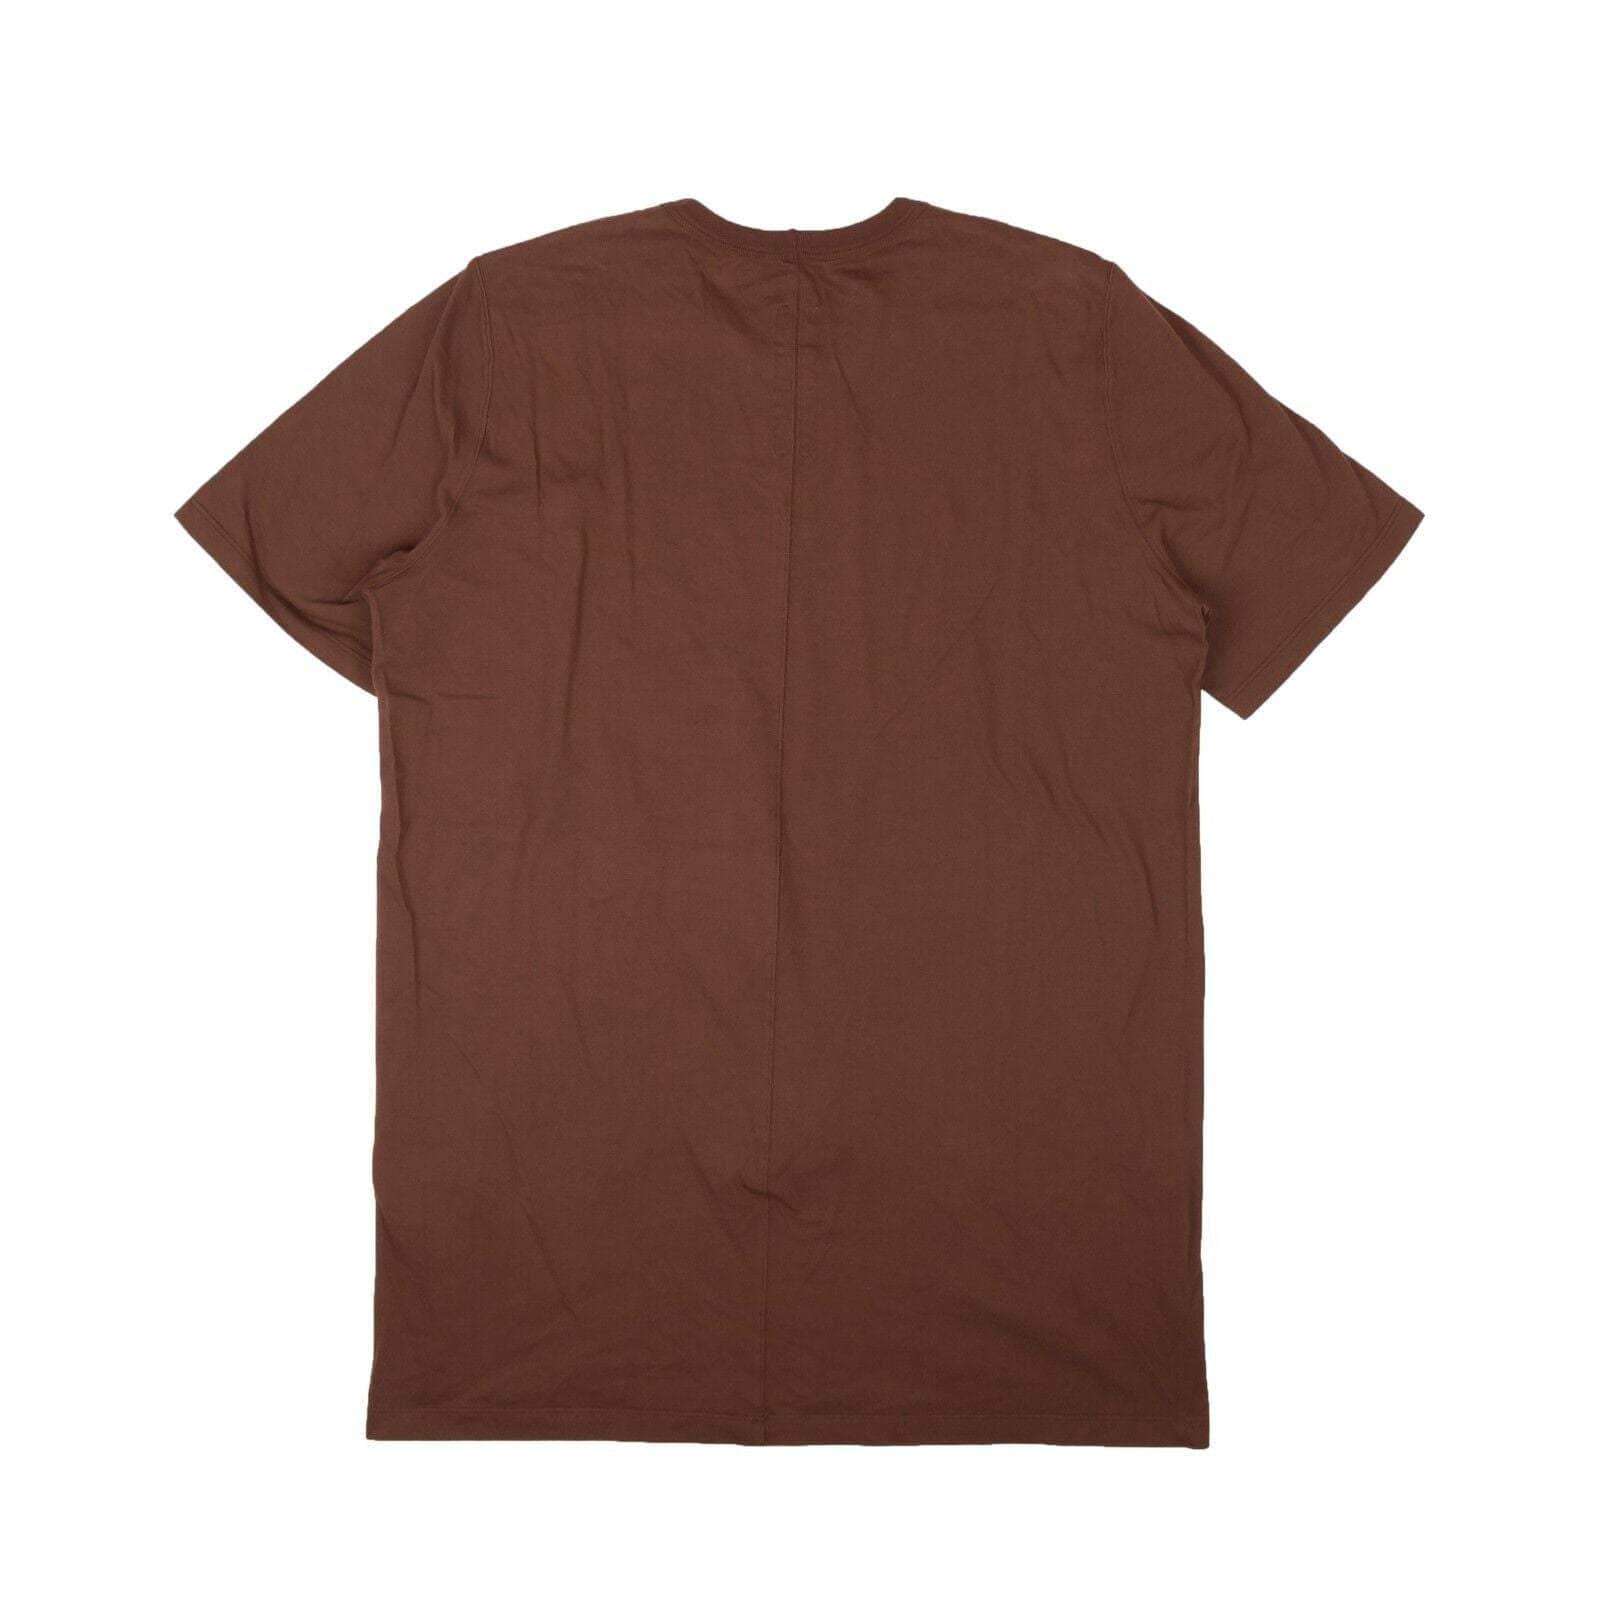 Rick Owens 250-500, channelenable-all, chicmi, couponcollection, gender-mens, main-clothing, mens-shoes, rick-owens, size-m, size-s, size-xl XL / RU21S6264_23 Throat Brown Cotton Level Short Sleeve T-Shirt ROW-XTSH-0024/XL ROW-XTSH-0024/XL